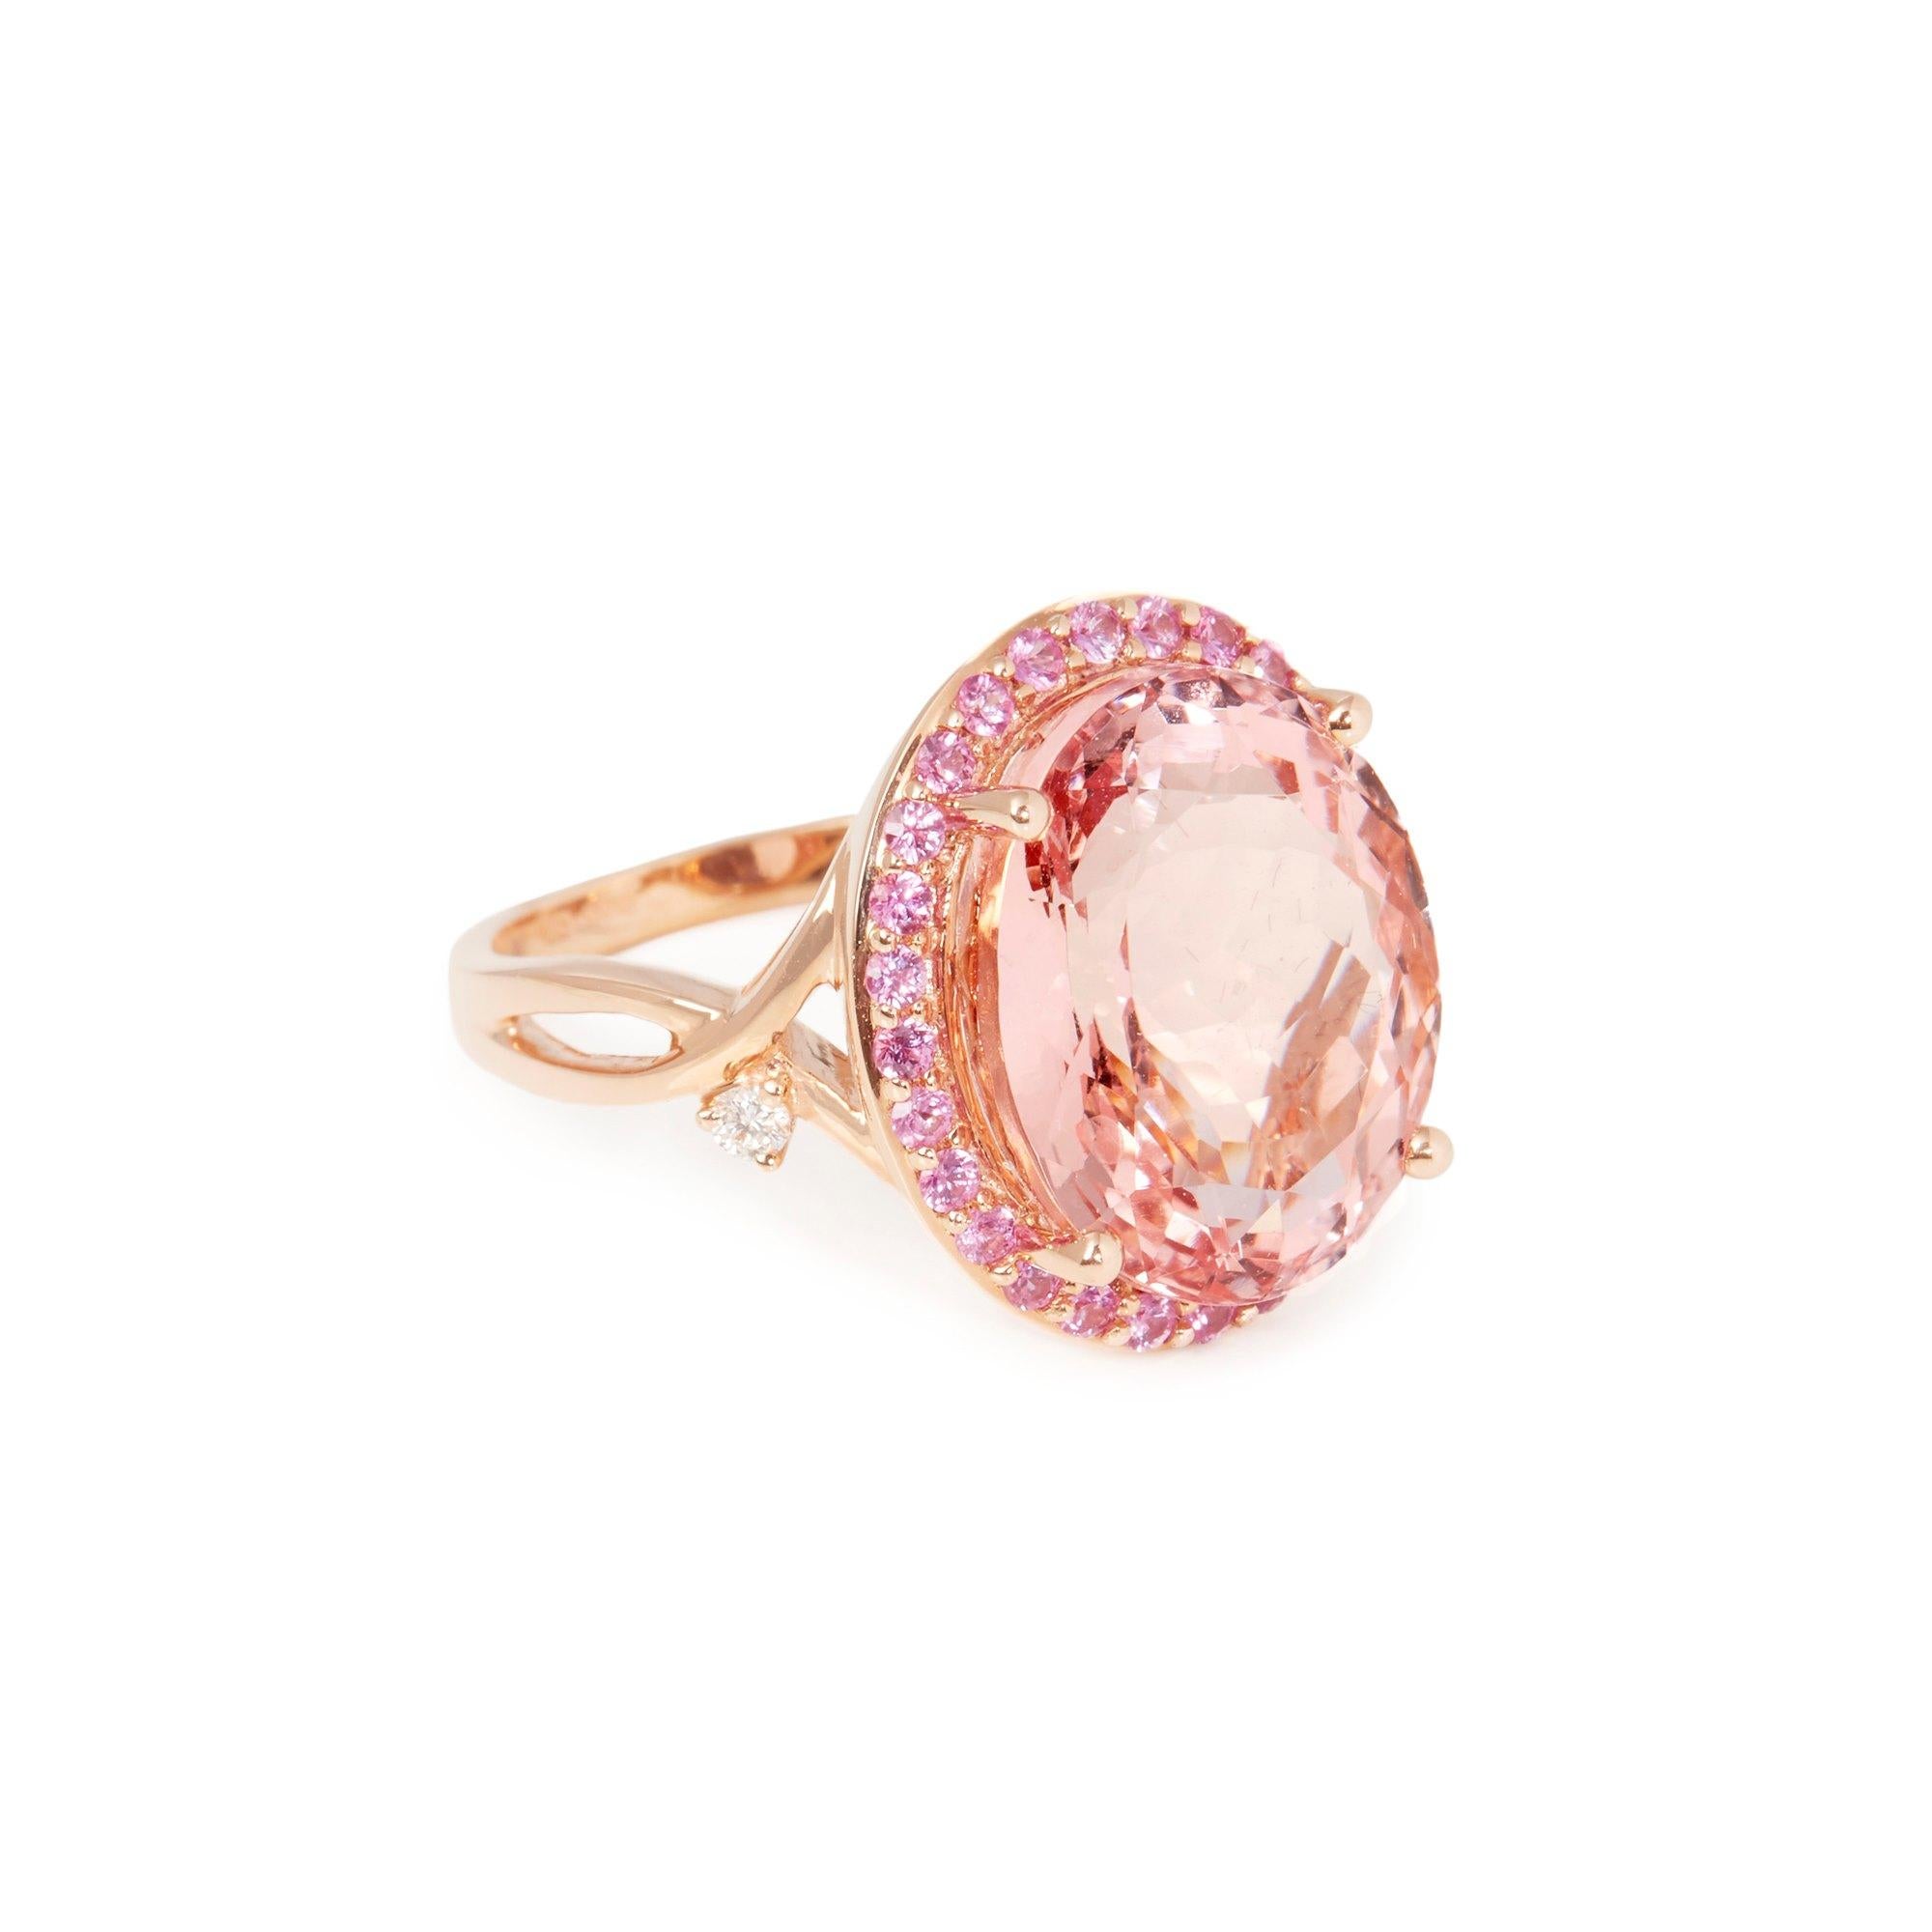 This ring designed by David Jerome is from his private collection and features one oval cut morganite totalling 12.51cts sourced in Brazil. Set with round brilliant cut pink Sapphires totalling 0.64cts mounted in an 18k rose gold setting. Finger